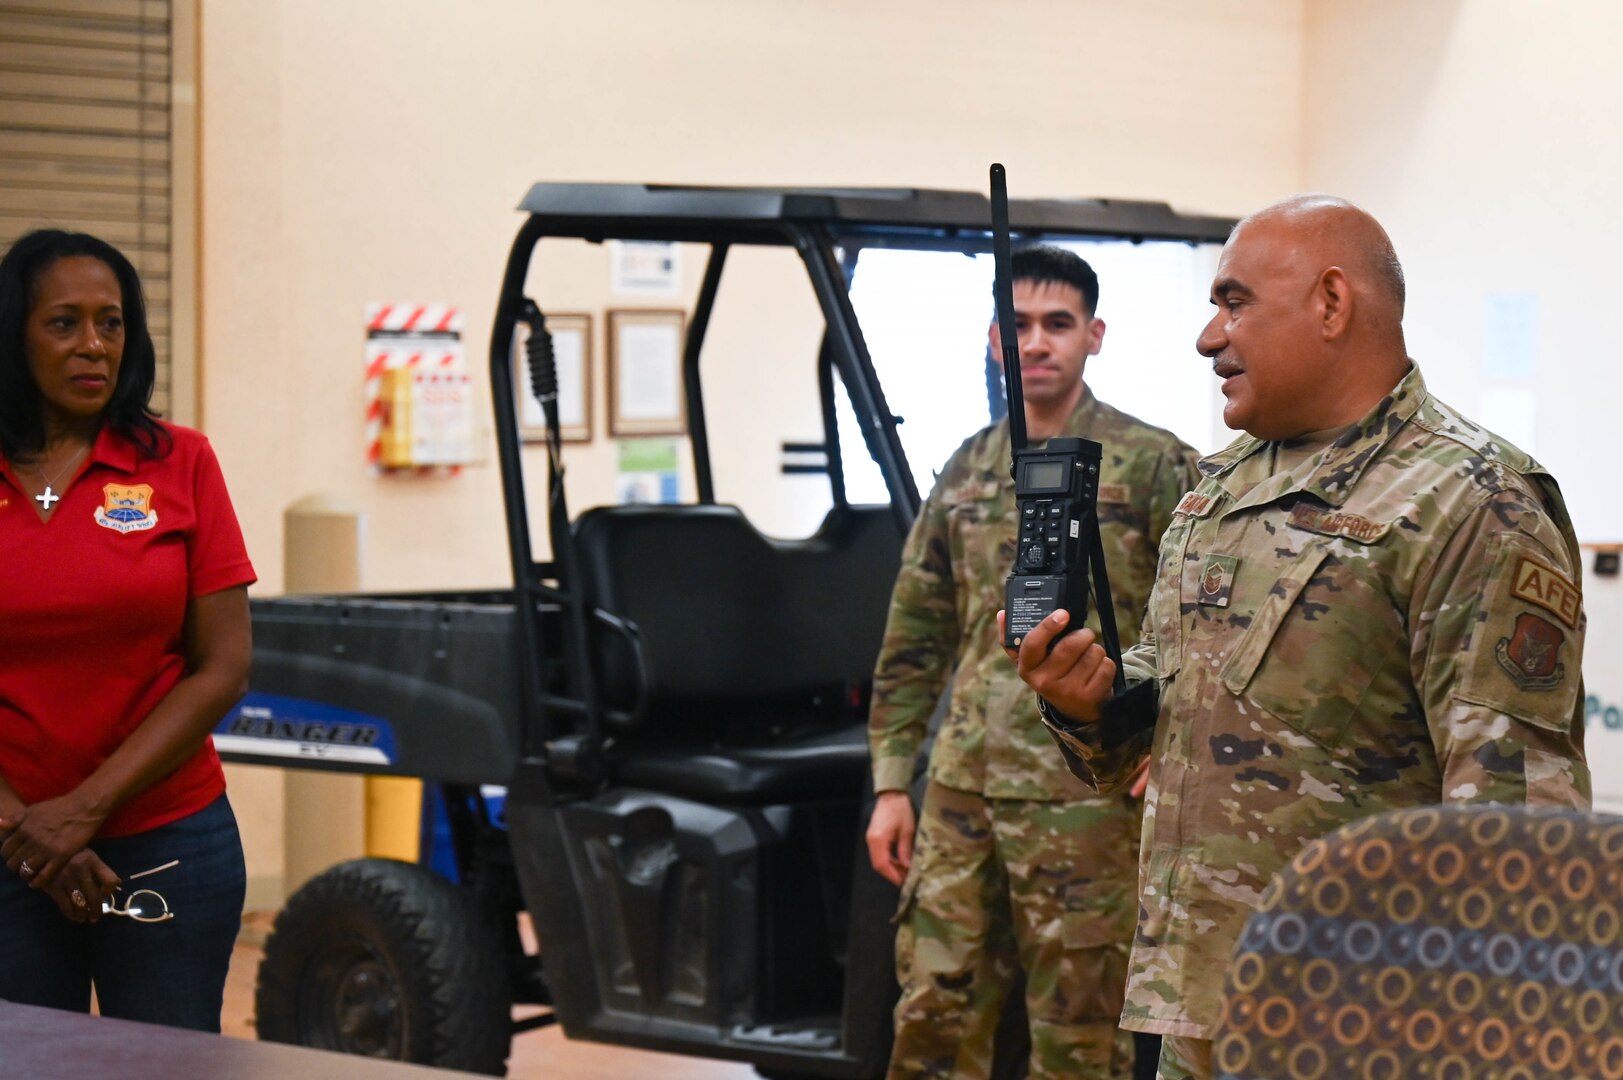 Master Sgt. Richard Garcia, 433rd Operations Support Squadron aircrew flight equipment lead trainer, holds a radio while instructing a group of honorary commanders about survival tools and skills at Joint Base San Antonio-Lackland, Texas, Aug. 6, 2022. The honorary commanders' program helps bridge the gap between the military and community. (U.S. Air Force photo by Senior Airman Brittany Wich)